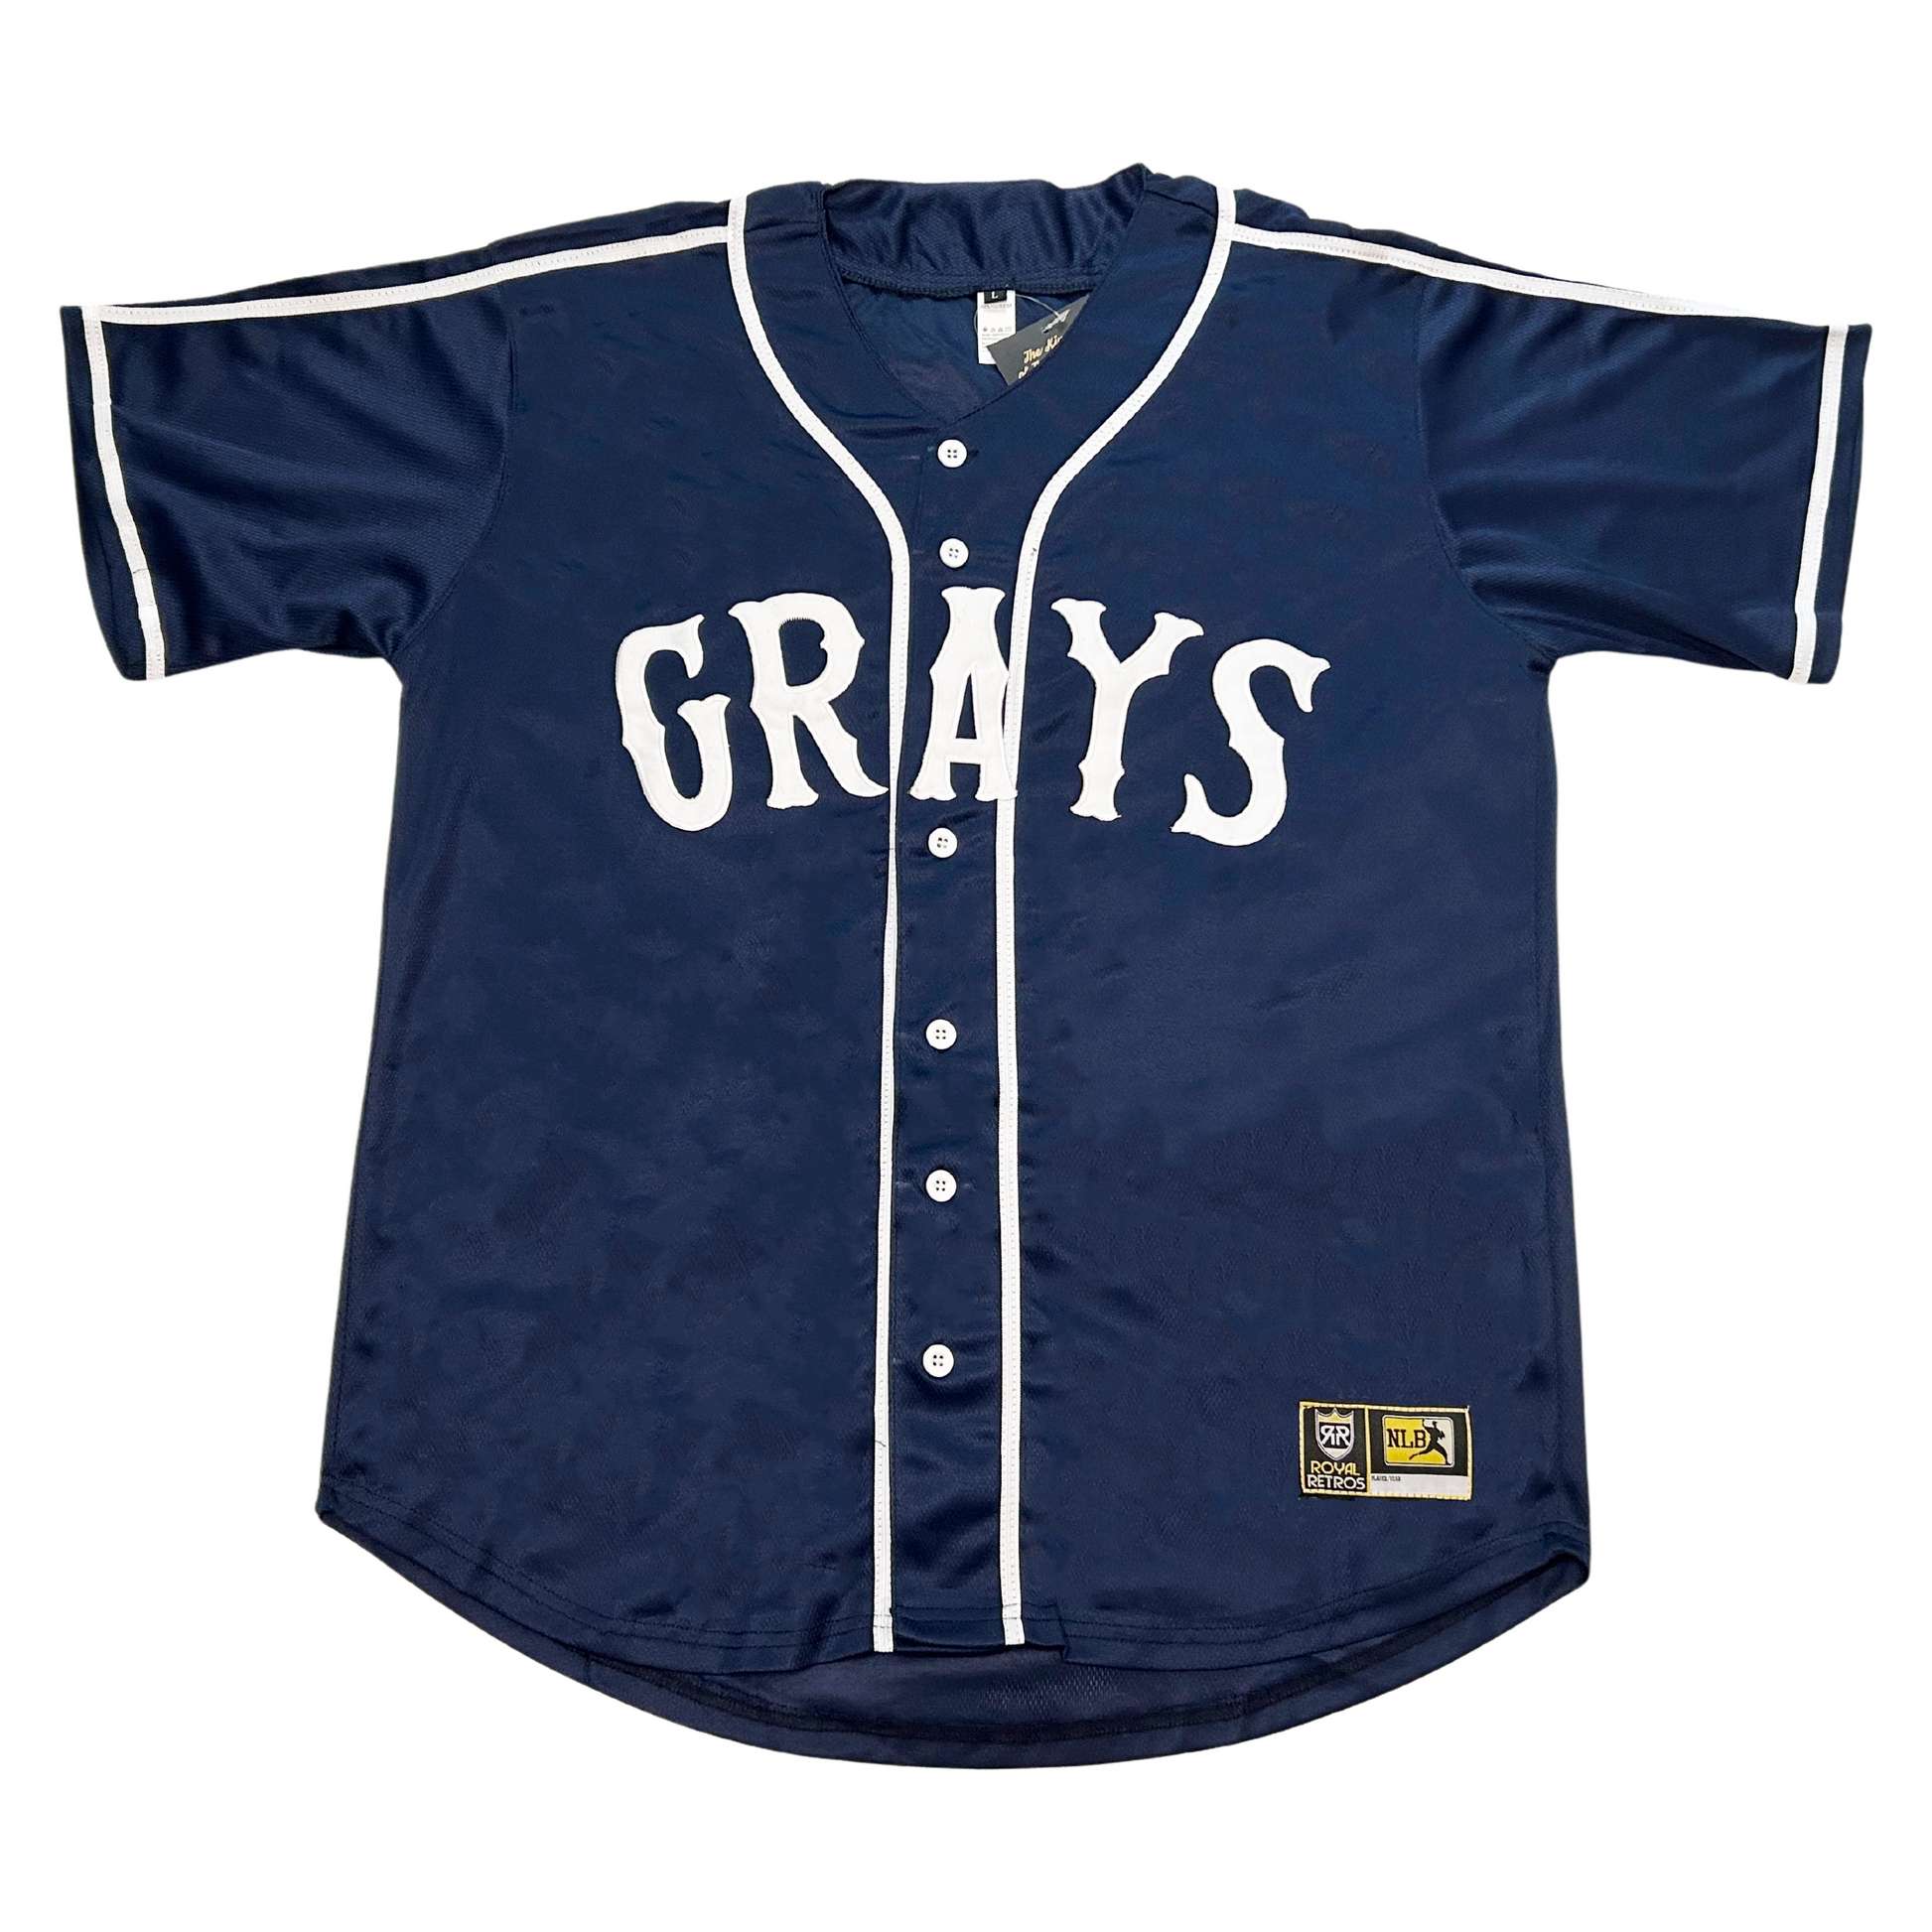 Homestead Grays NLB Remix Jersey Royal Retros blue with white lettering